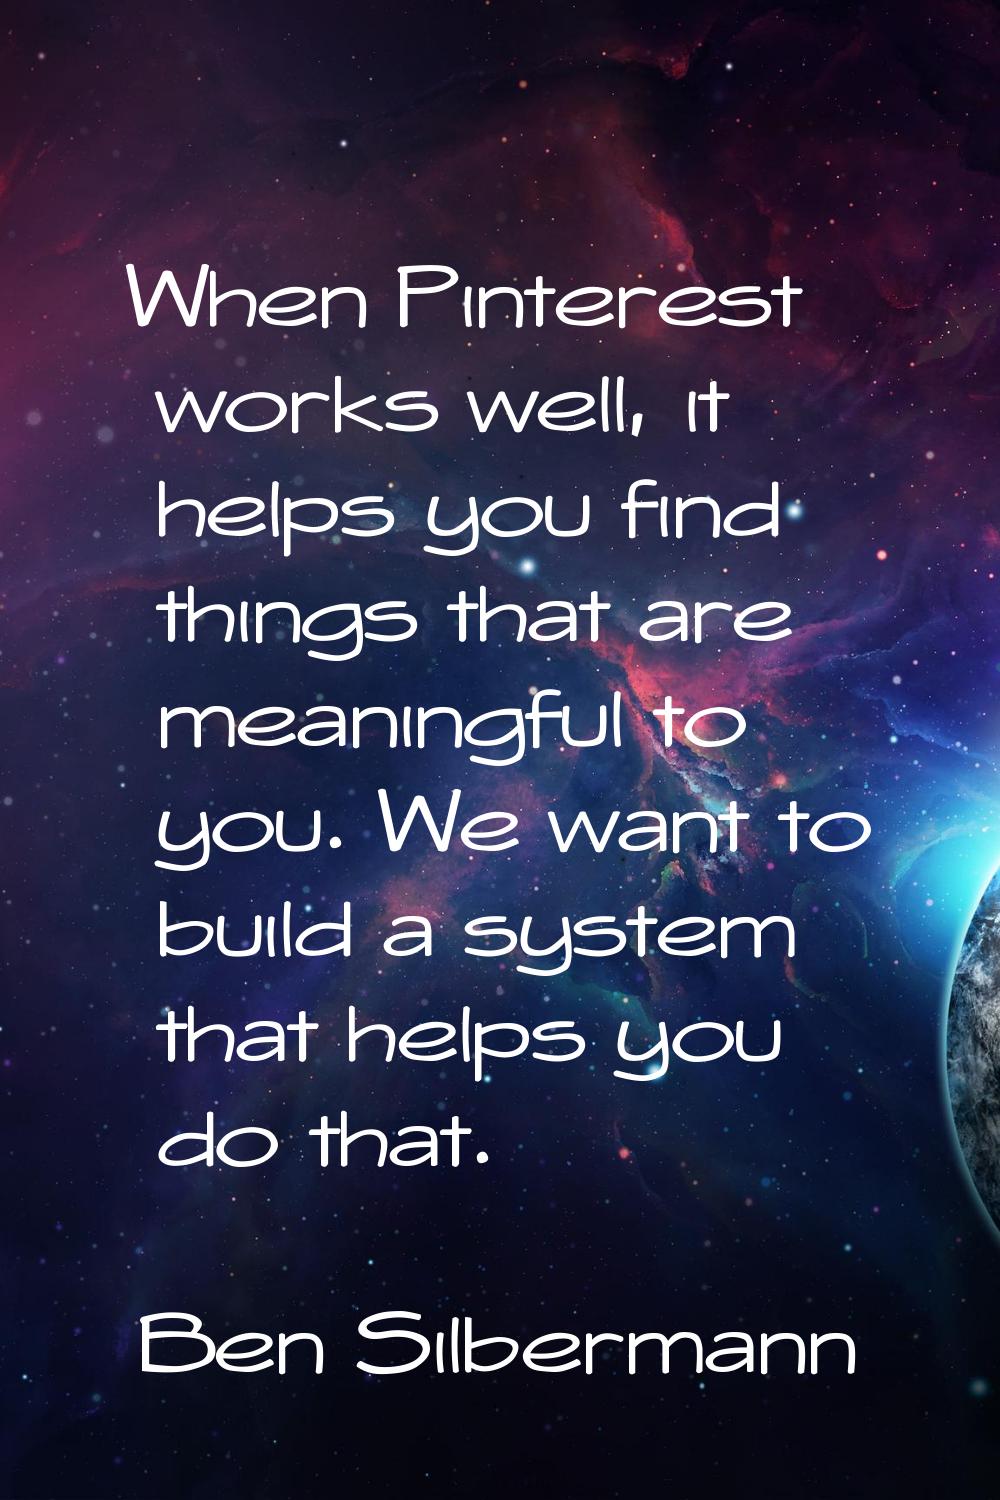 When Pinterest works well, it helps you find things that are meaningful to you. We want to build a 